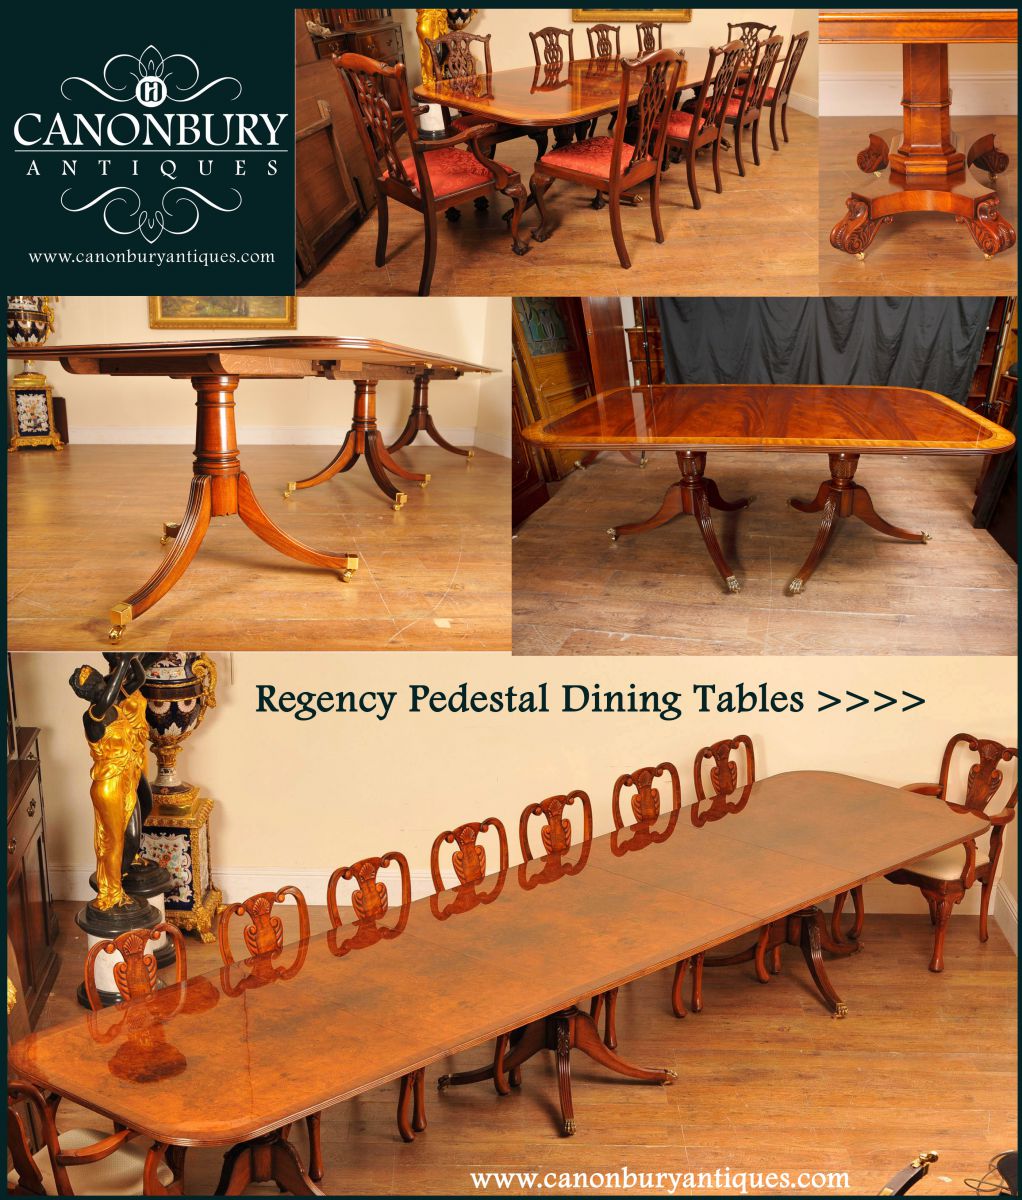 Some gorgeous shots of our range of Regency pedestal dining tables